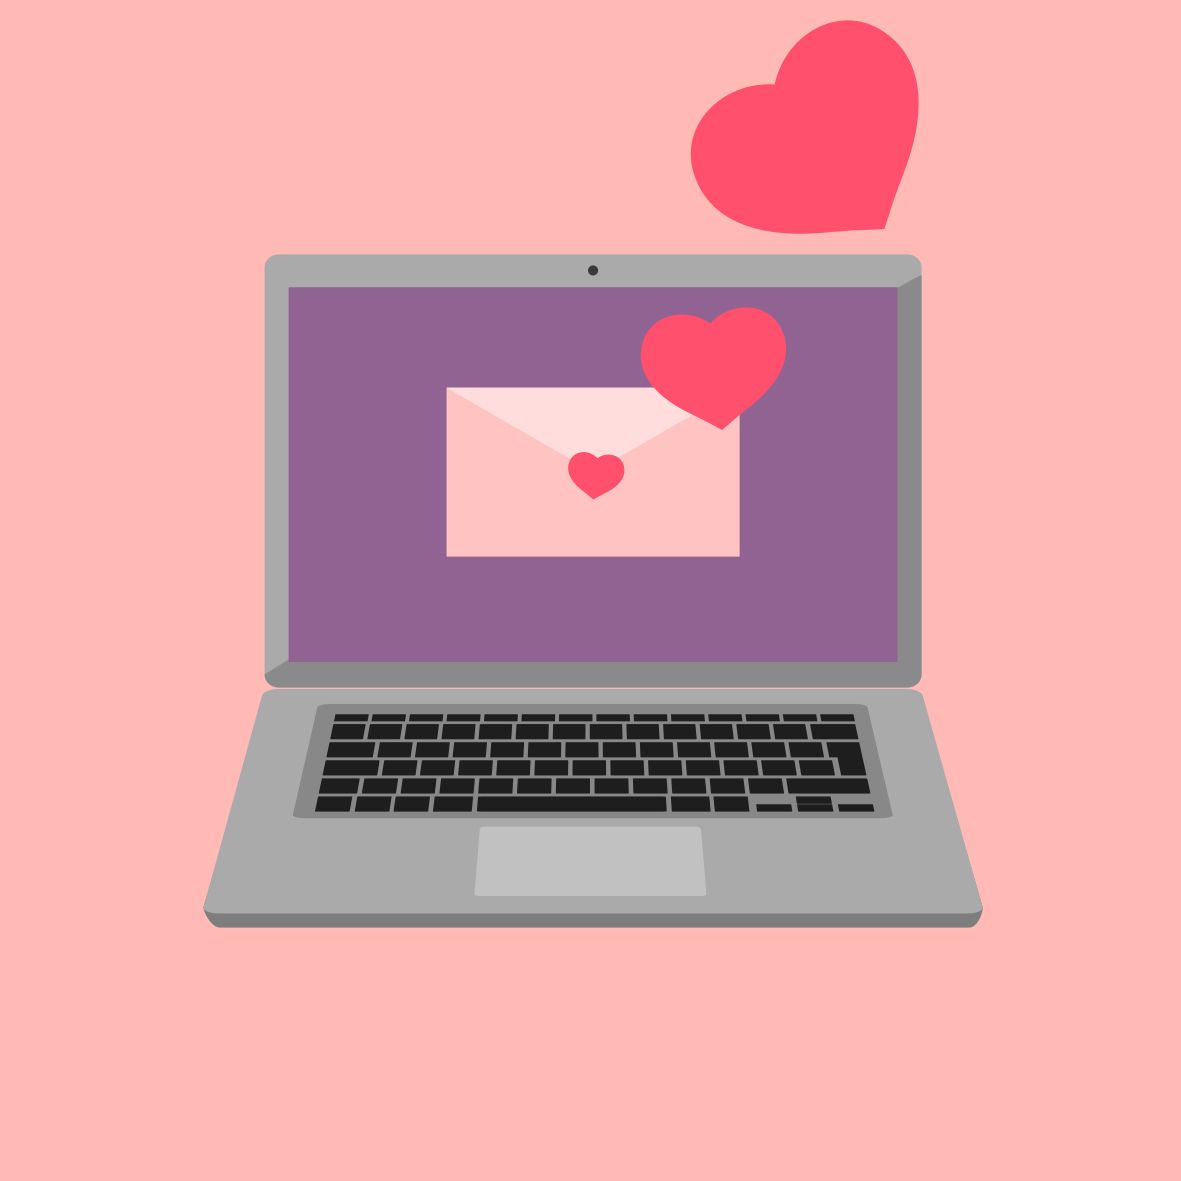 5 Brands Whose Emails We Actually Love Seeing in Our Inboxes